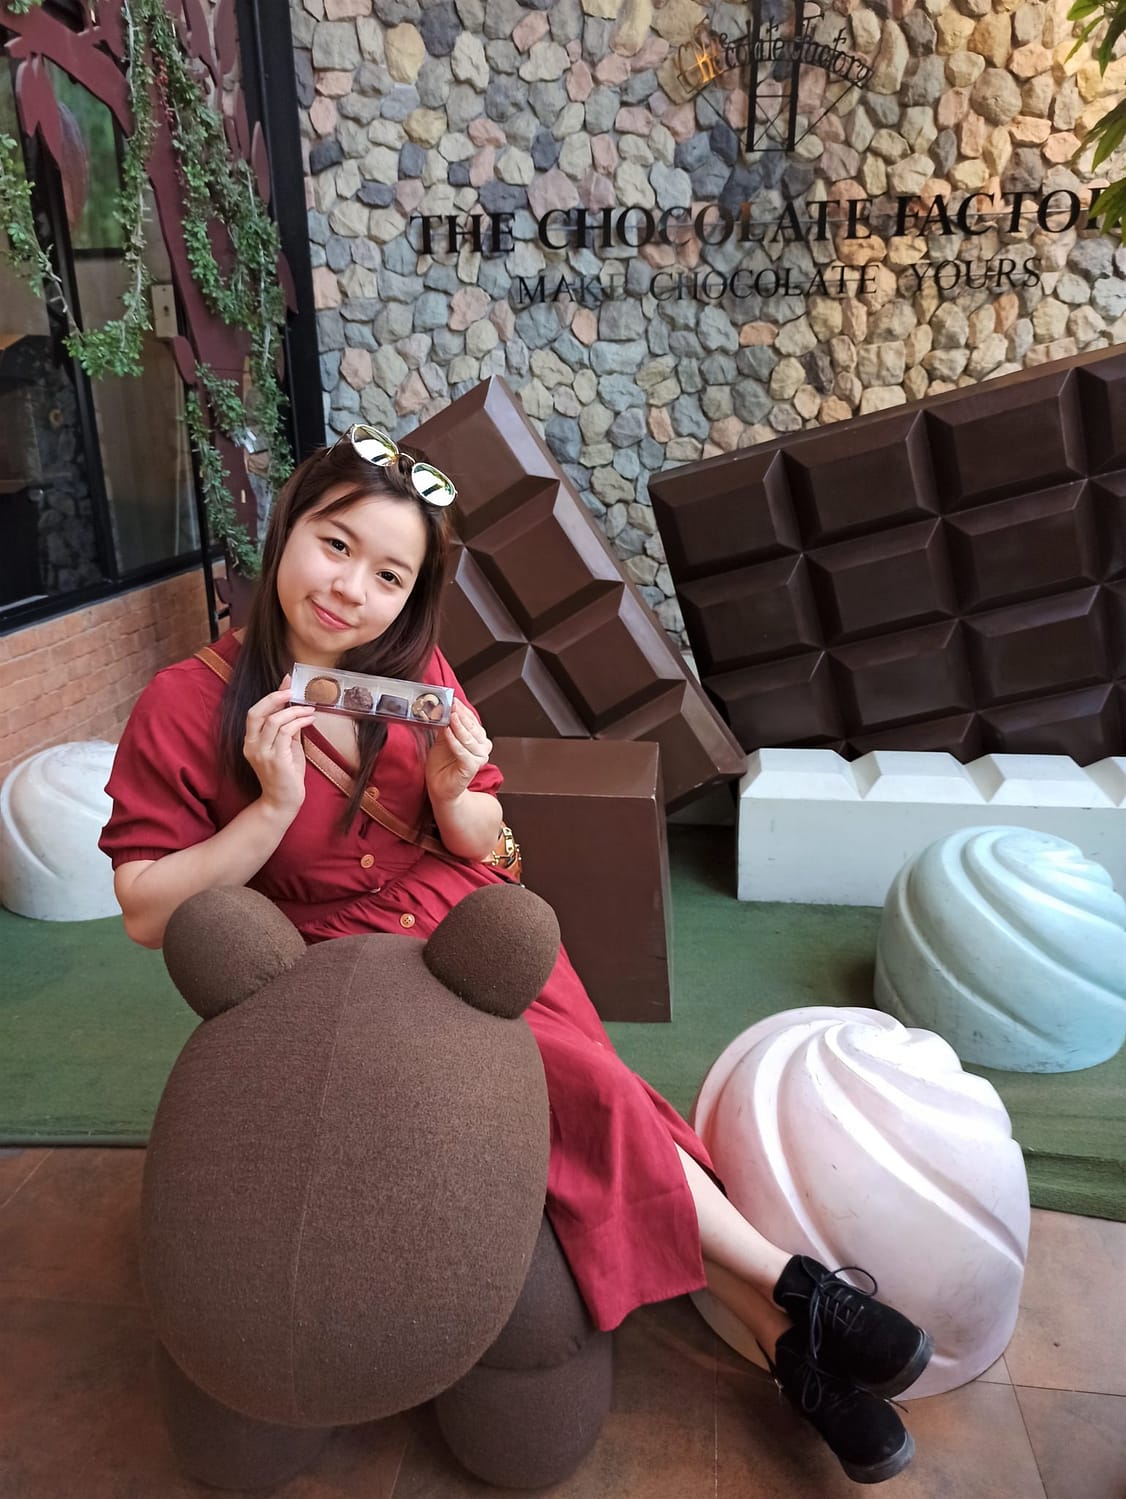 Lady posing with chocolate at The Chocolate Factory, Khao Yai